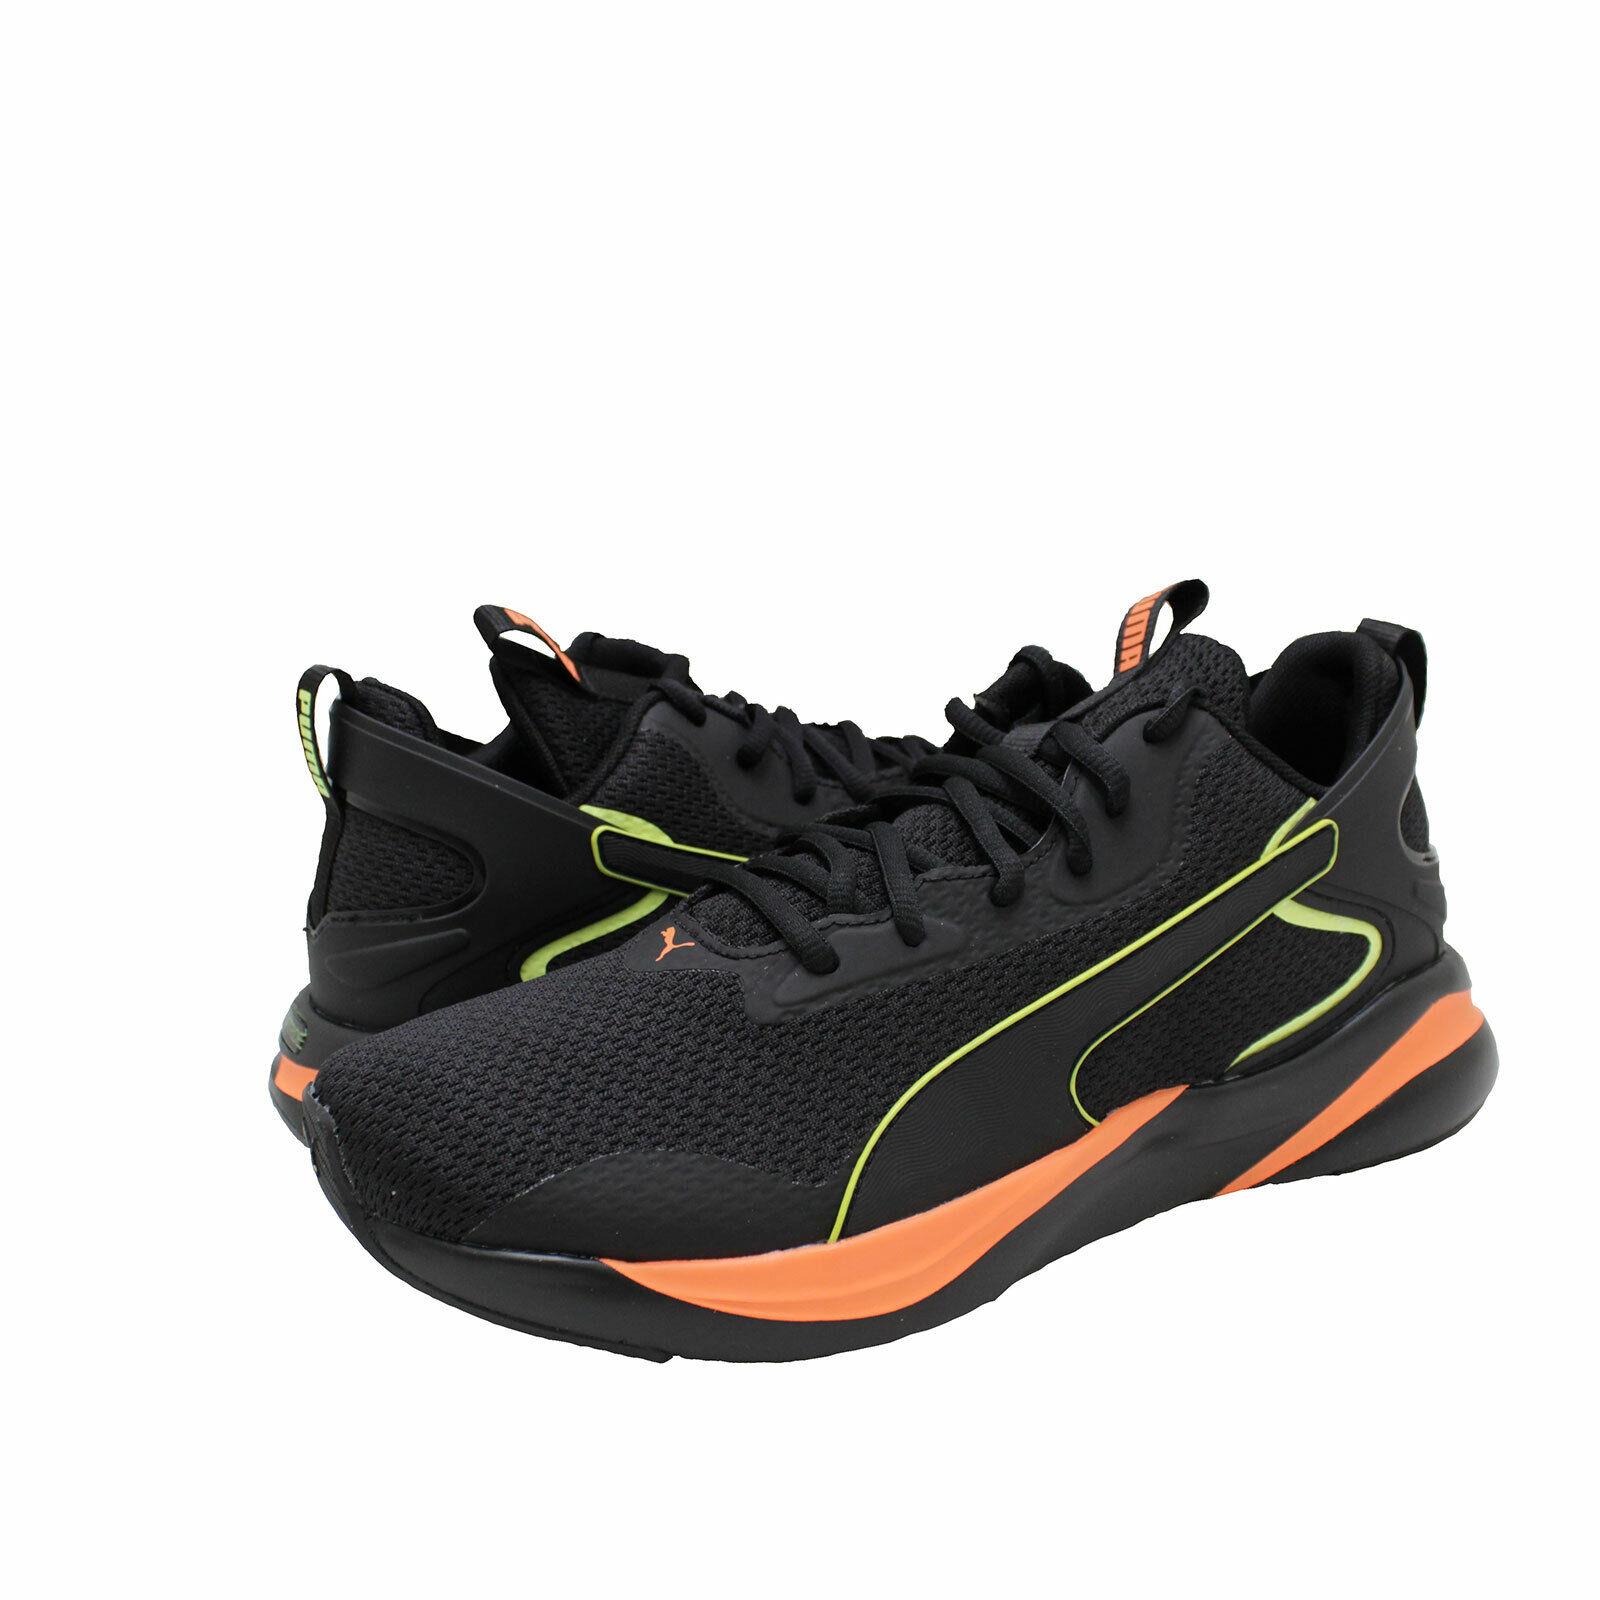 Men`s Shoes Puma Softride Rift Tech Running Athletic Sneakers 193737-02 Black